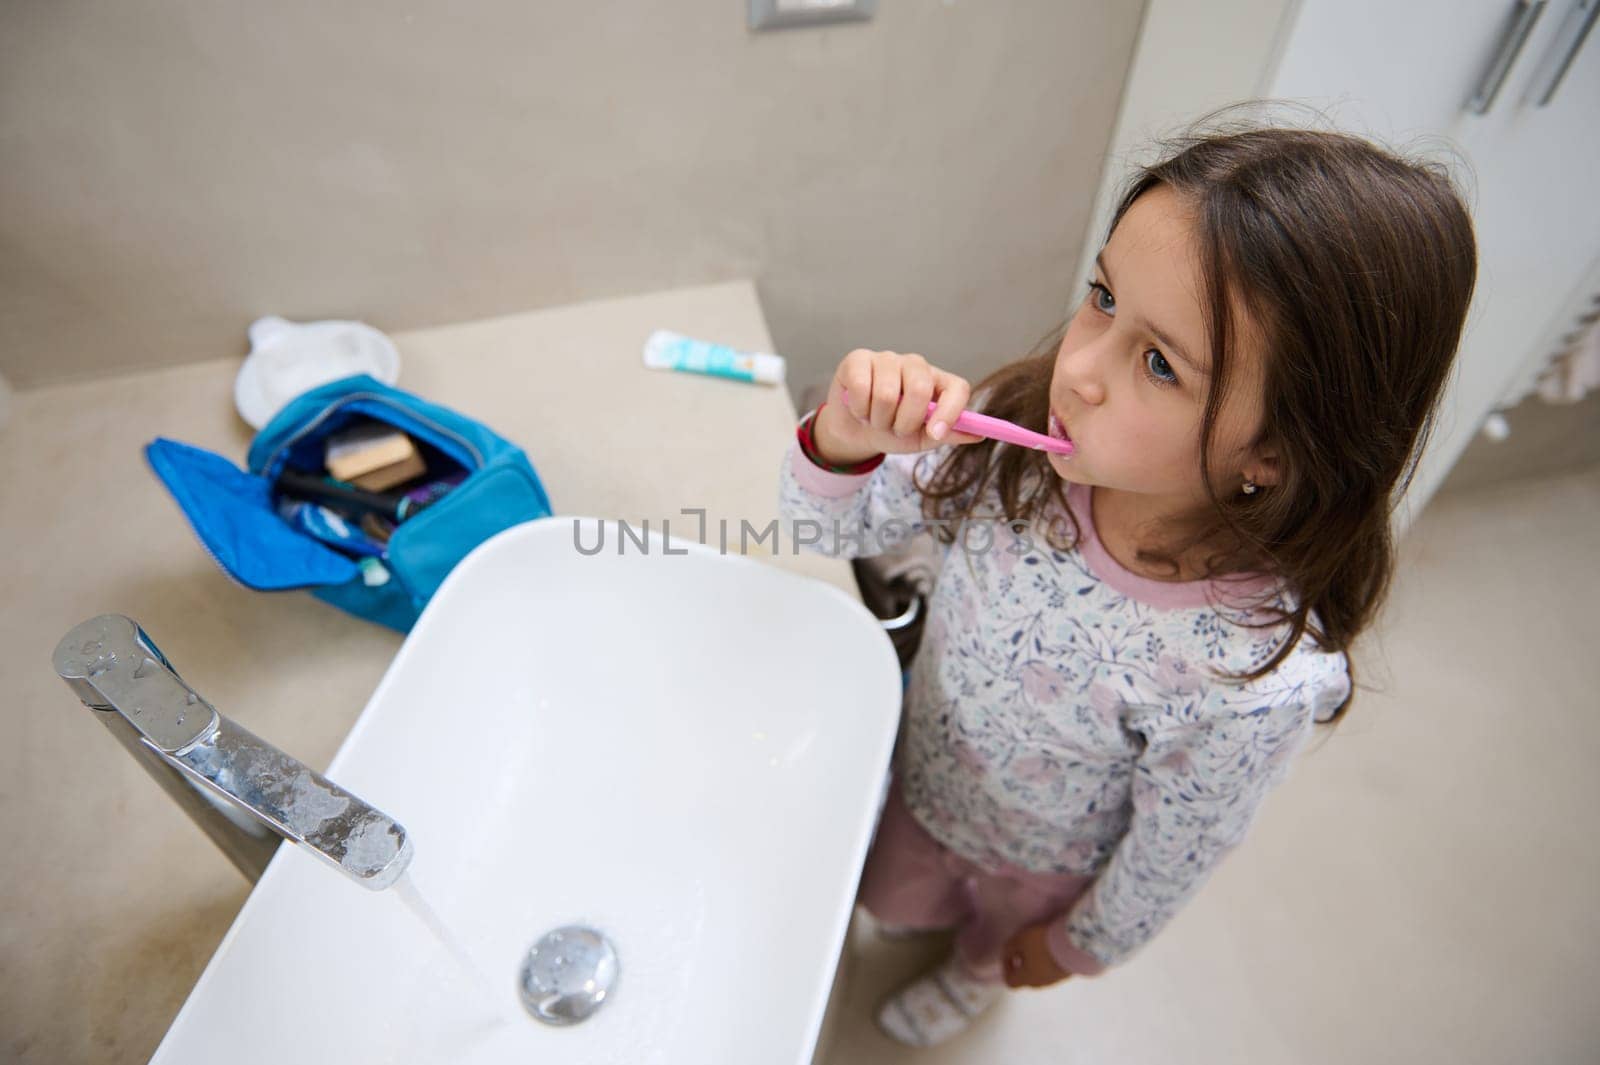 View from above of a child girl brushing teeth, standing at white washbasin in the home bathroom. Dental hygiene concept by artgf